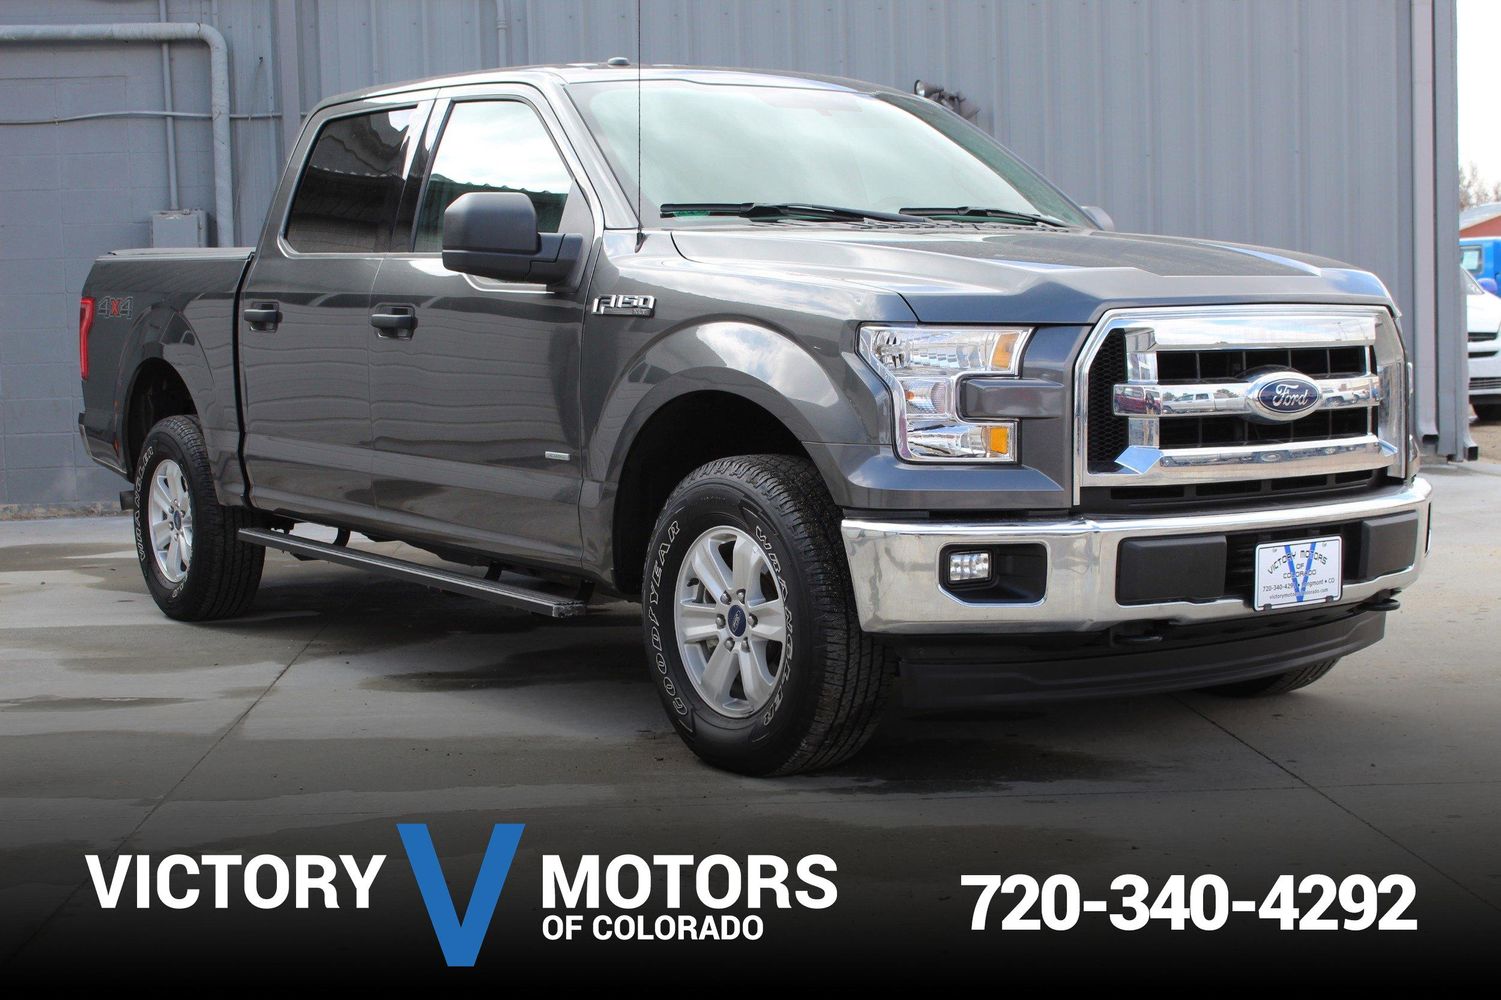 2017 Ford F-150 XLT | Victory Motors of Colorado 2017 Ford F 150 Xl 2.7 Ecoboost Towing Capacity